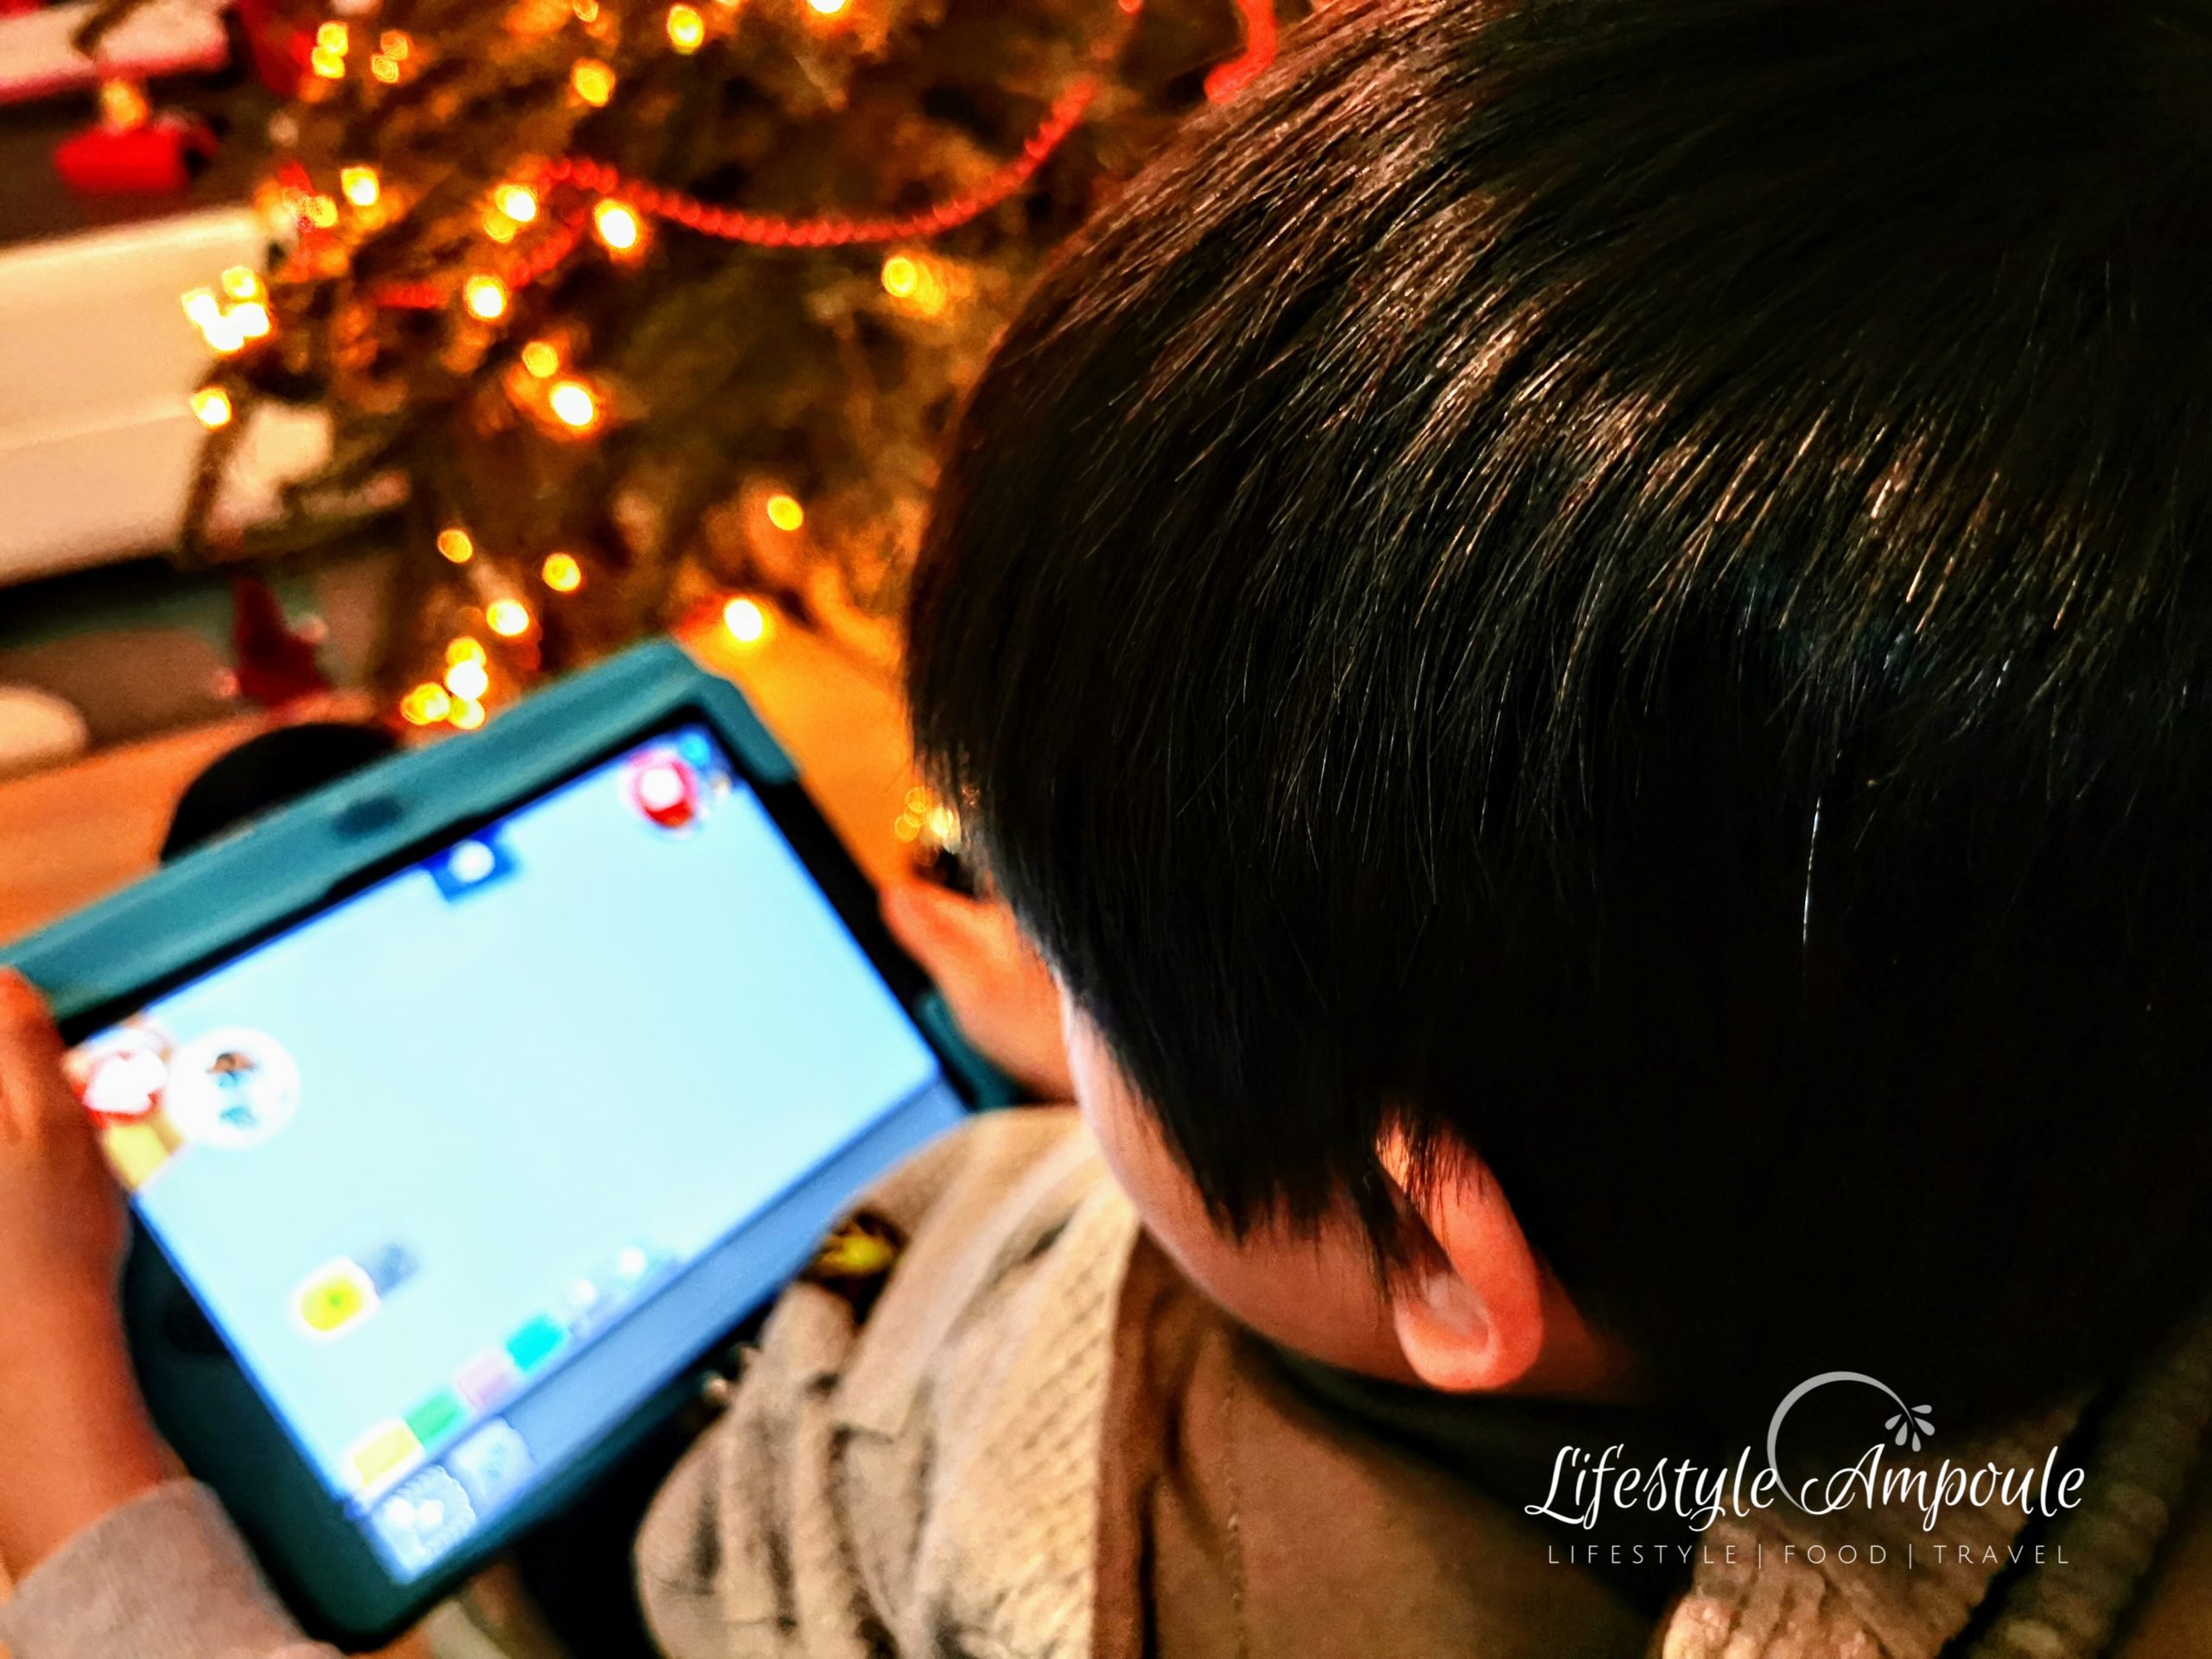 How to balance screen time for kids